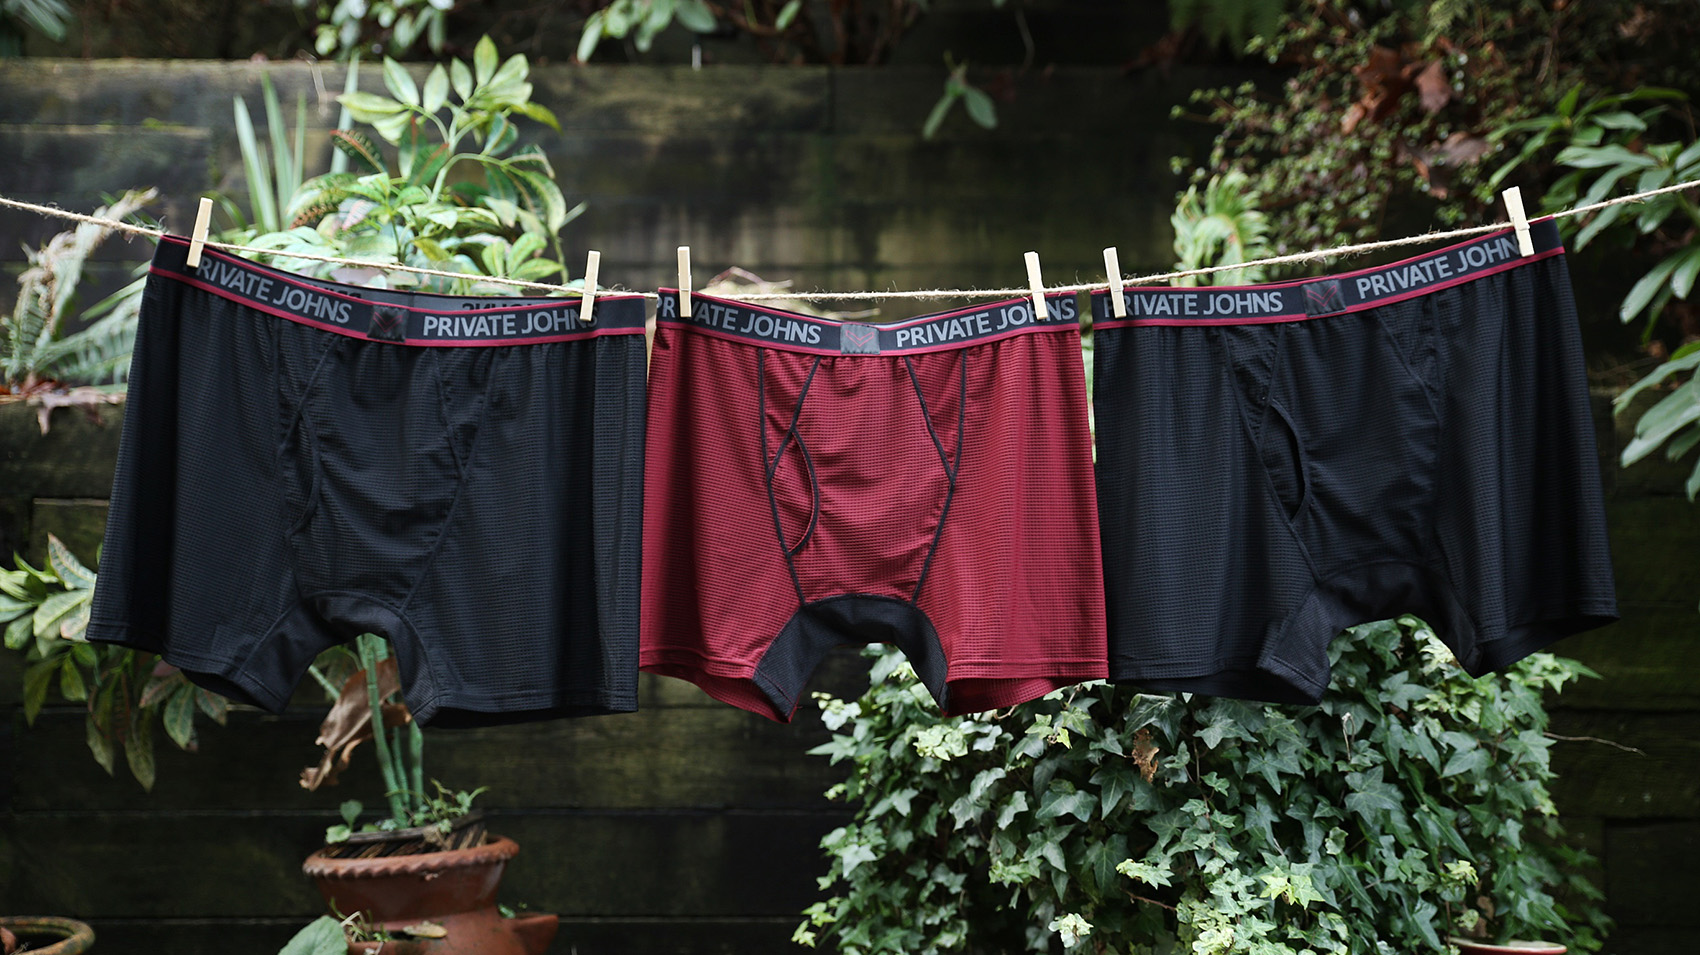 Private Johns Wants to Make the Best Big & Tall Underwear You've